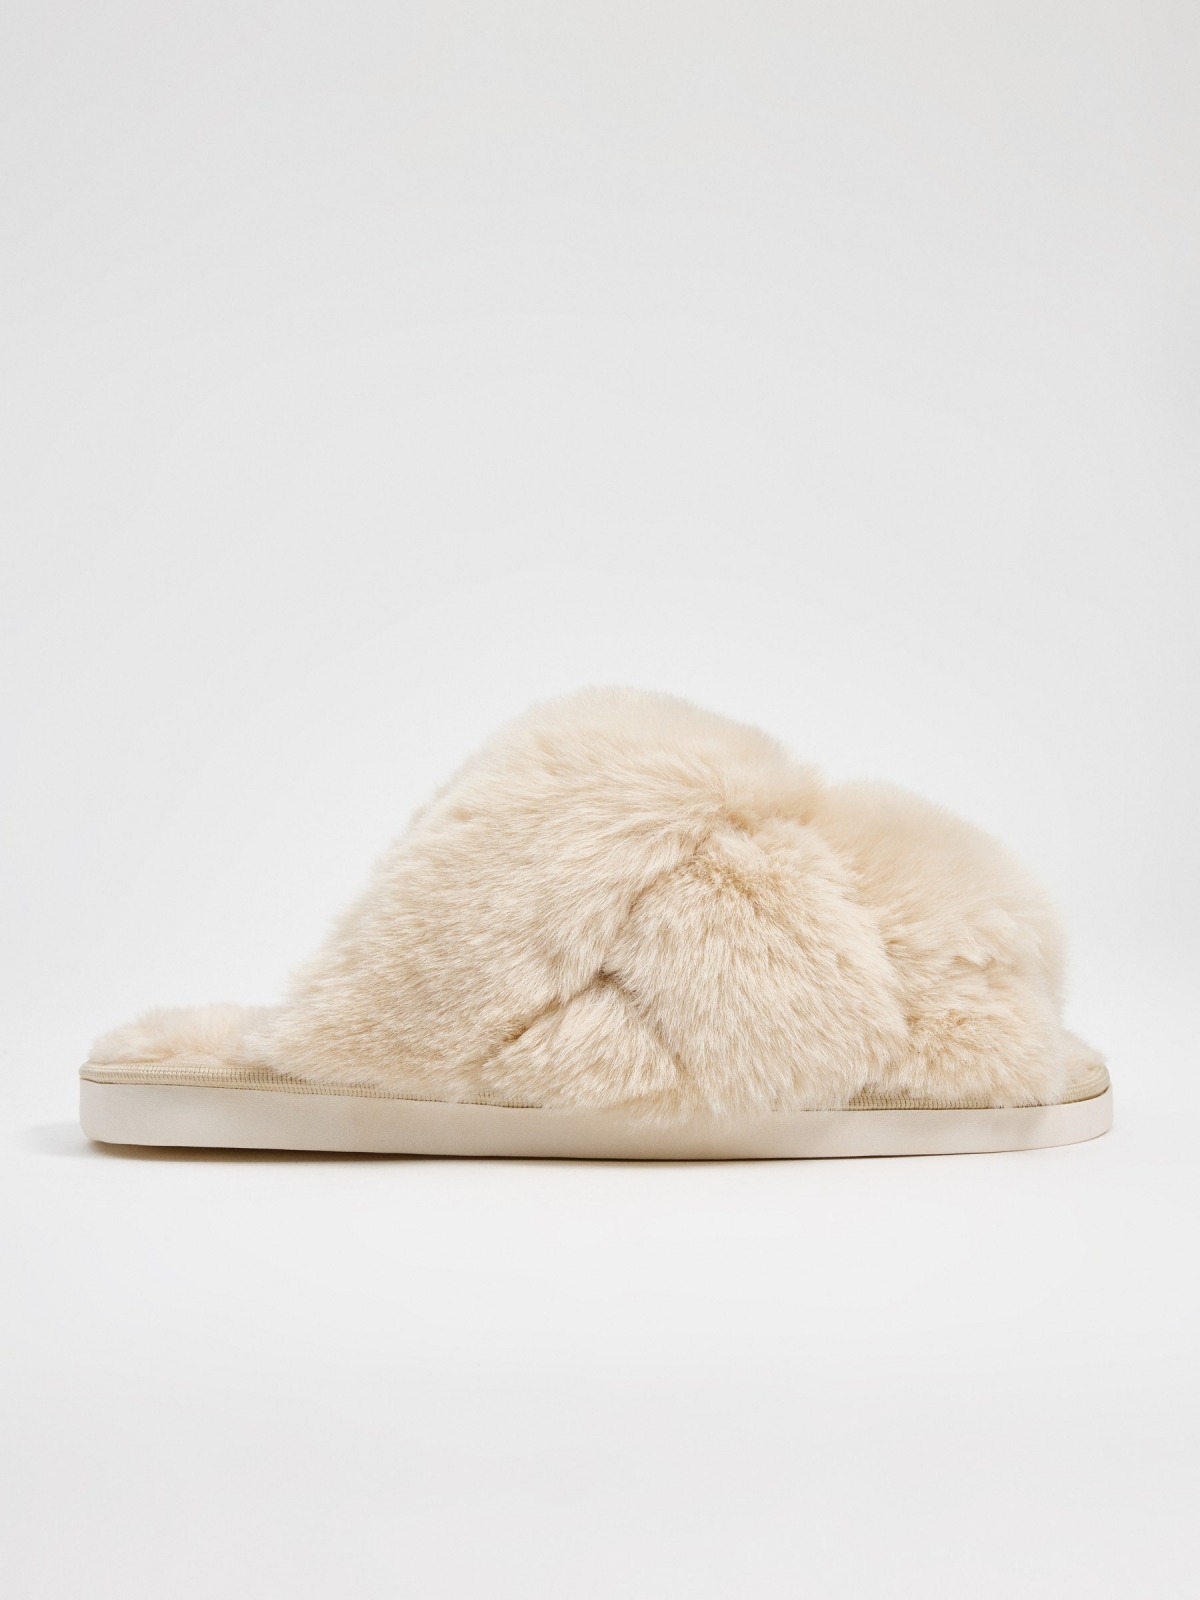 Fur slippers sand middle front view